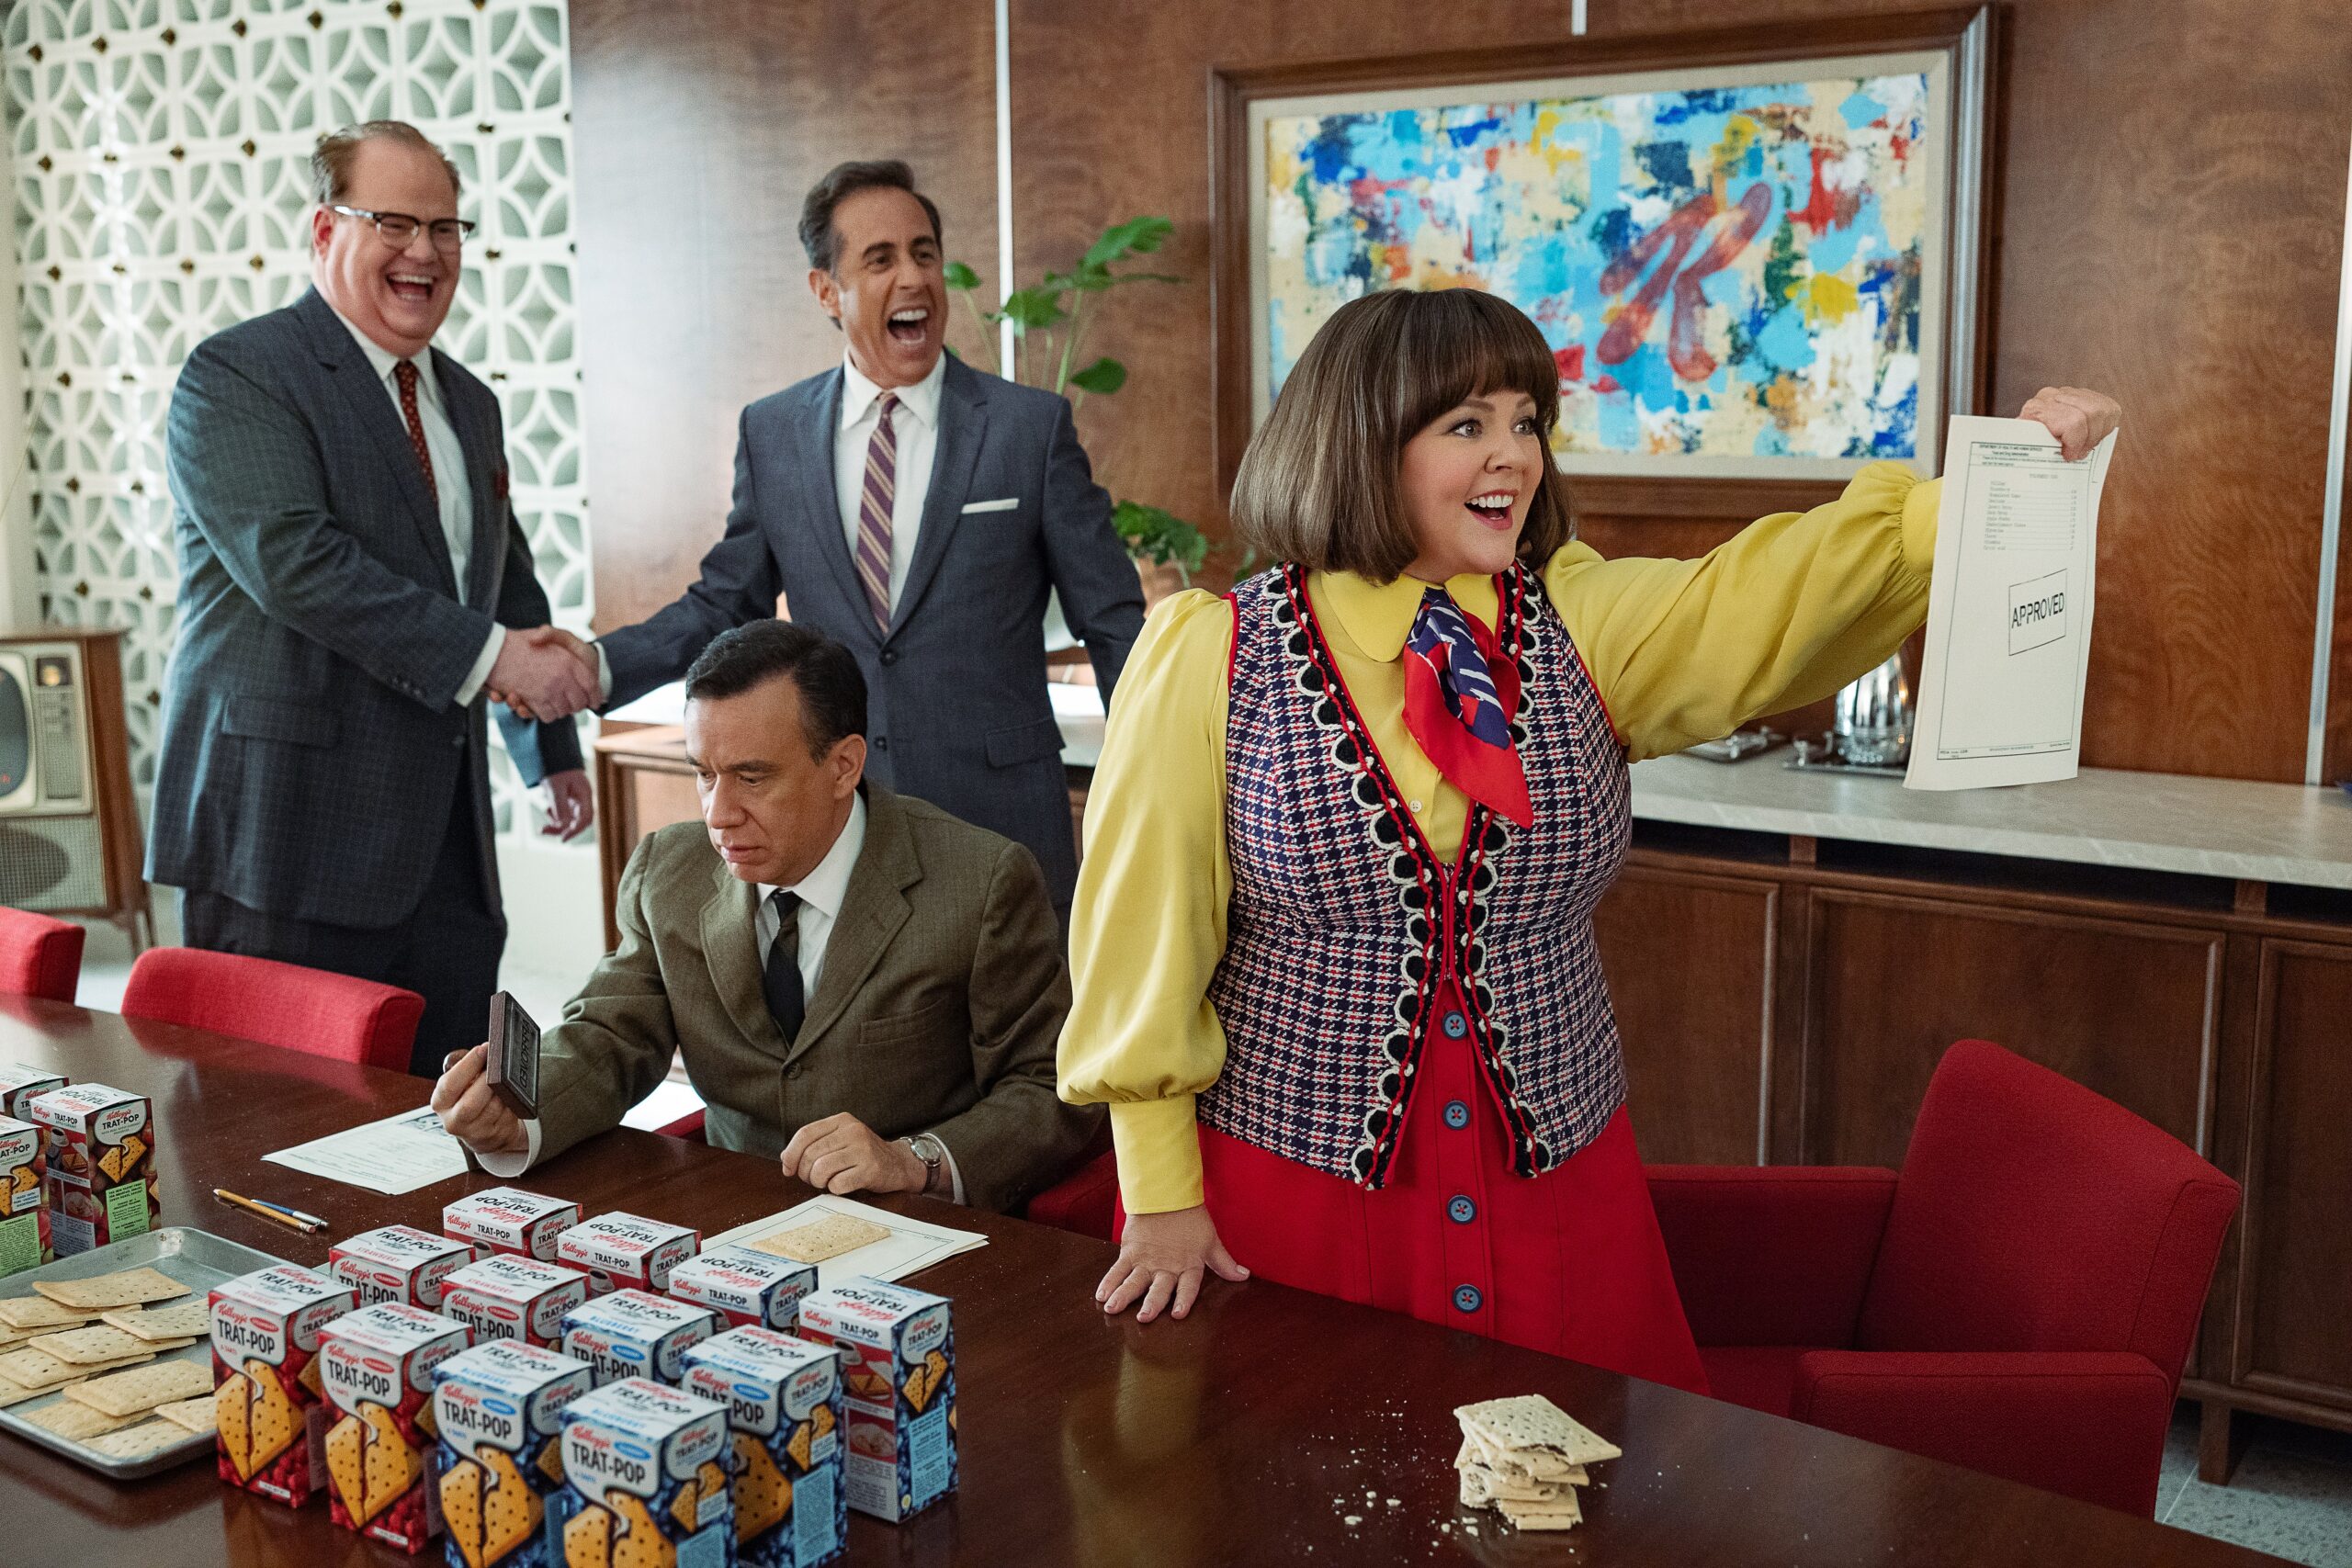 (L to R) Jim Gaffigan as Edsel Kellogg III, Jerry Seinfeld (Director) as Bob Cabana, Fred Armisen as Mike Puntz and Melissa McCarthy as Donna Stankowski in Unfrosted: The Pop-Tart Story.